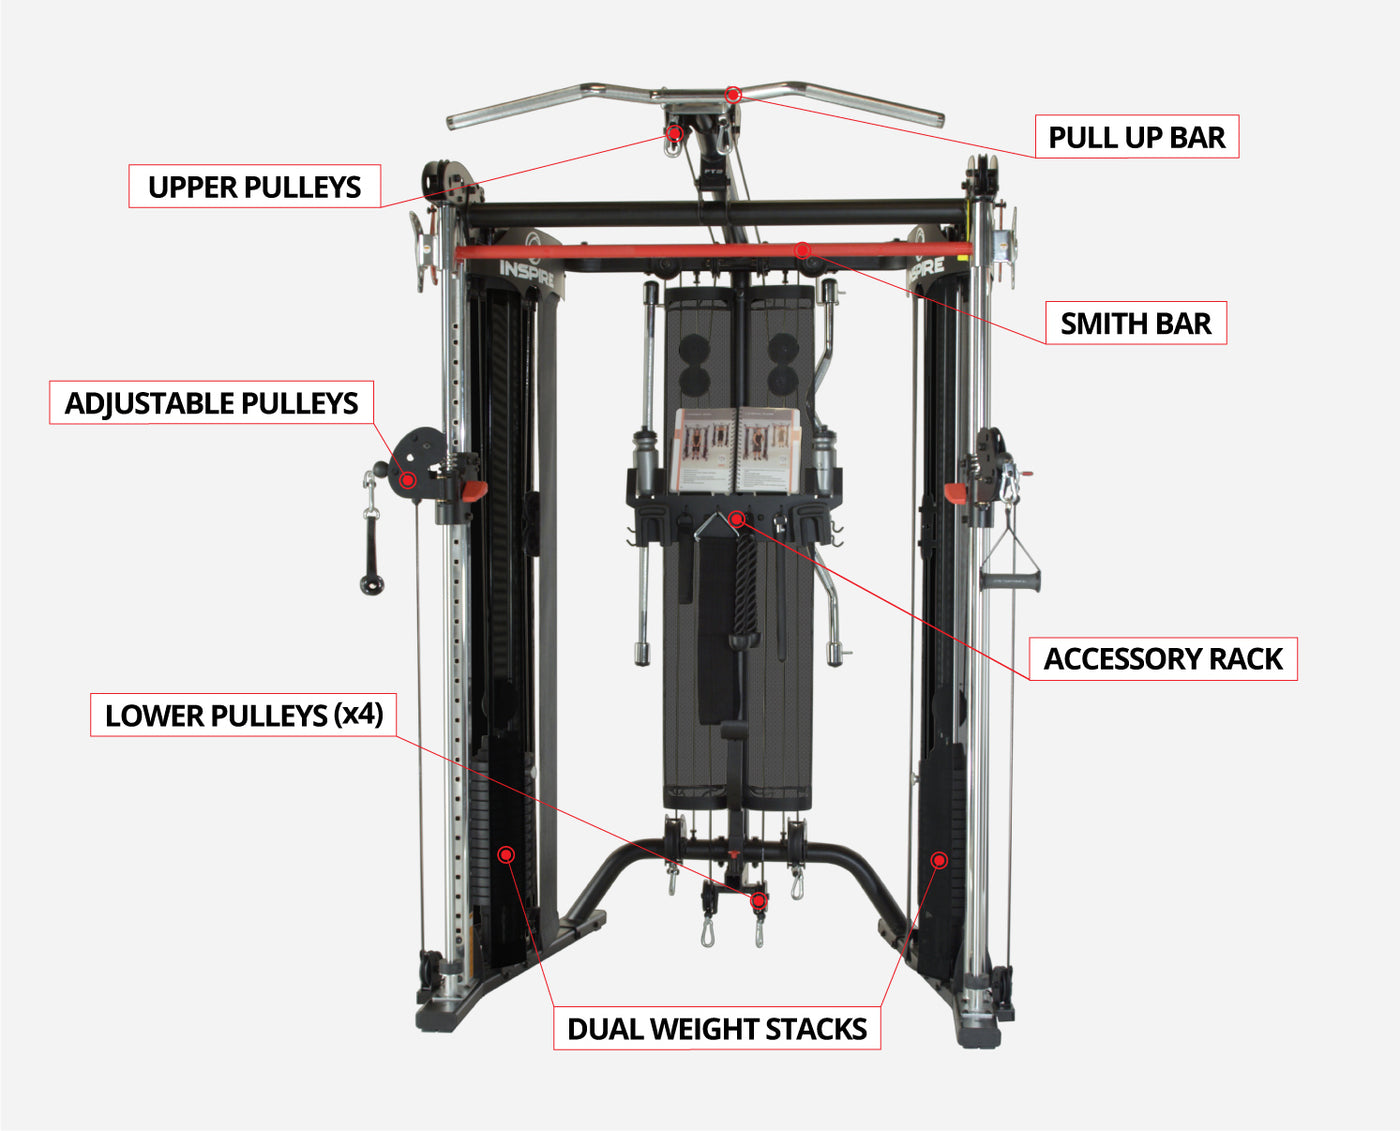 Inspire Fitness FT2 FUNCTIONAL TRAINER / SMITH MACHINE